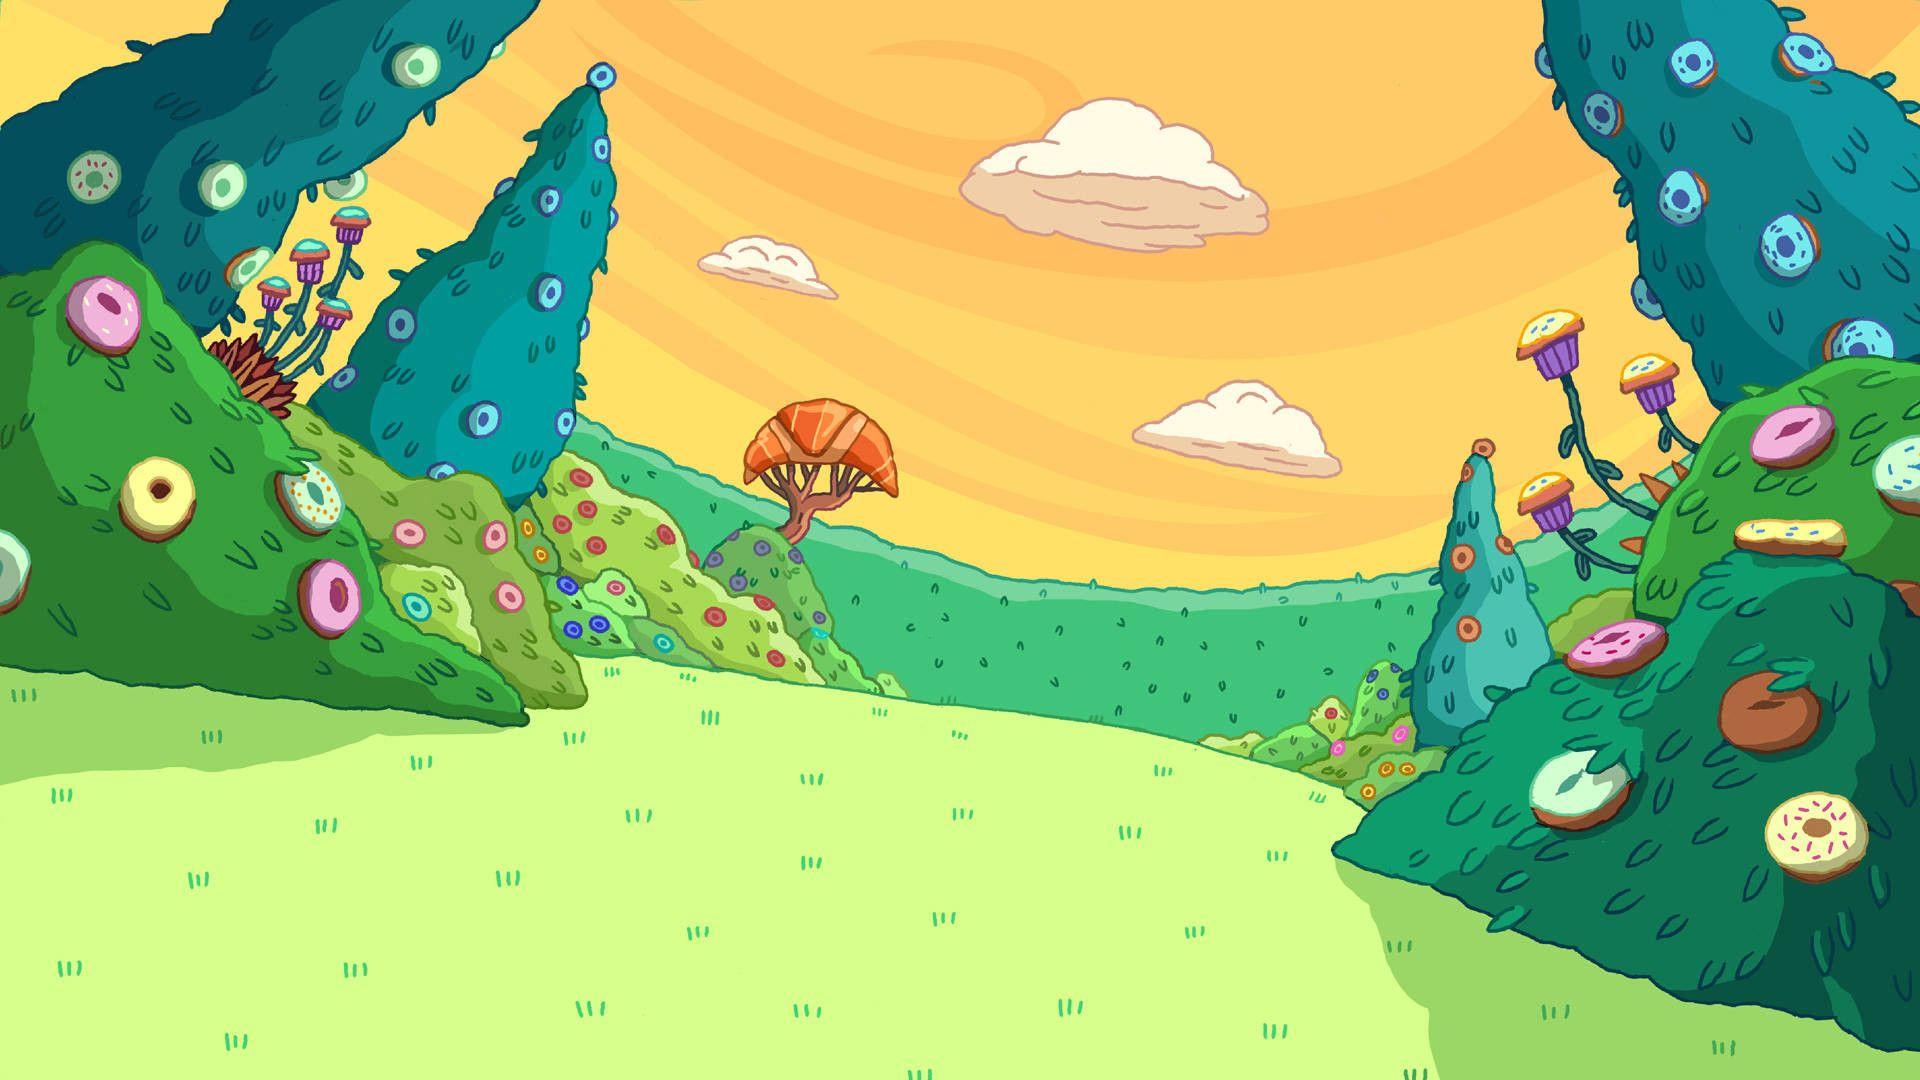 A landscape with trees made of candy, clouds made of cotton candy, and a sky made of frosting. - Adventure Time